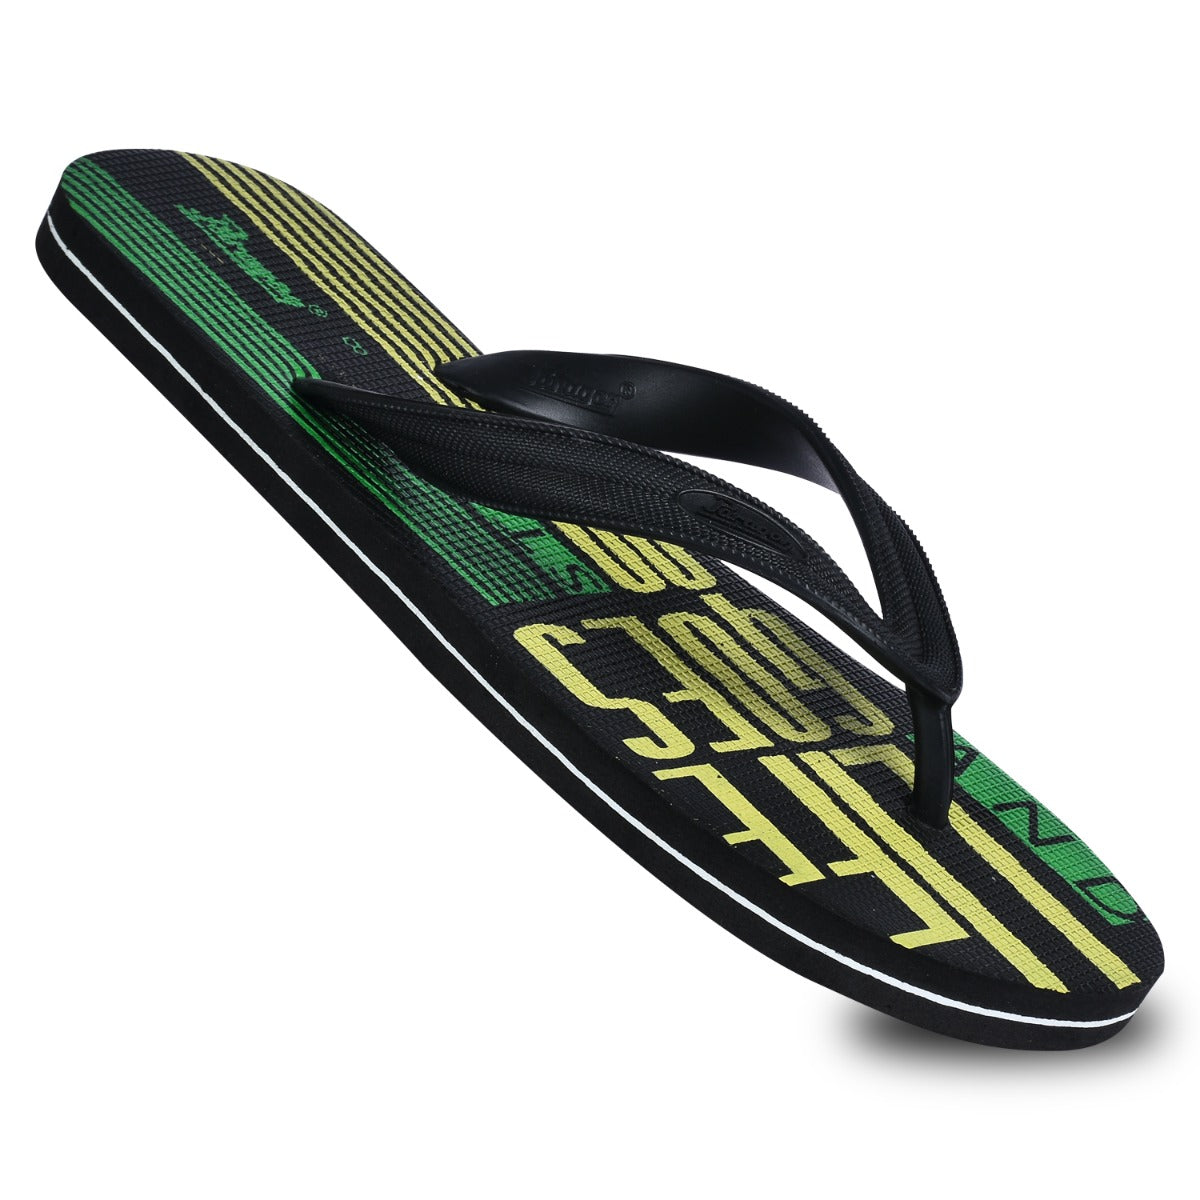 Paragon  HWK3704G Men Stylish Lightweight Flipflops | Casual &amp; Comfortable Daily-wear Slippers for Indoor &amp; Outdoor | For Everyday Use